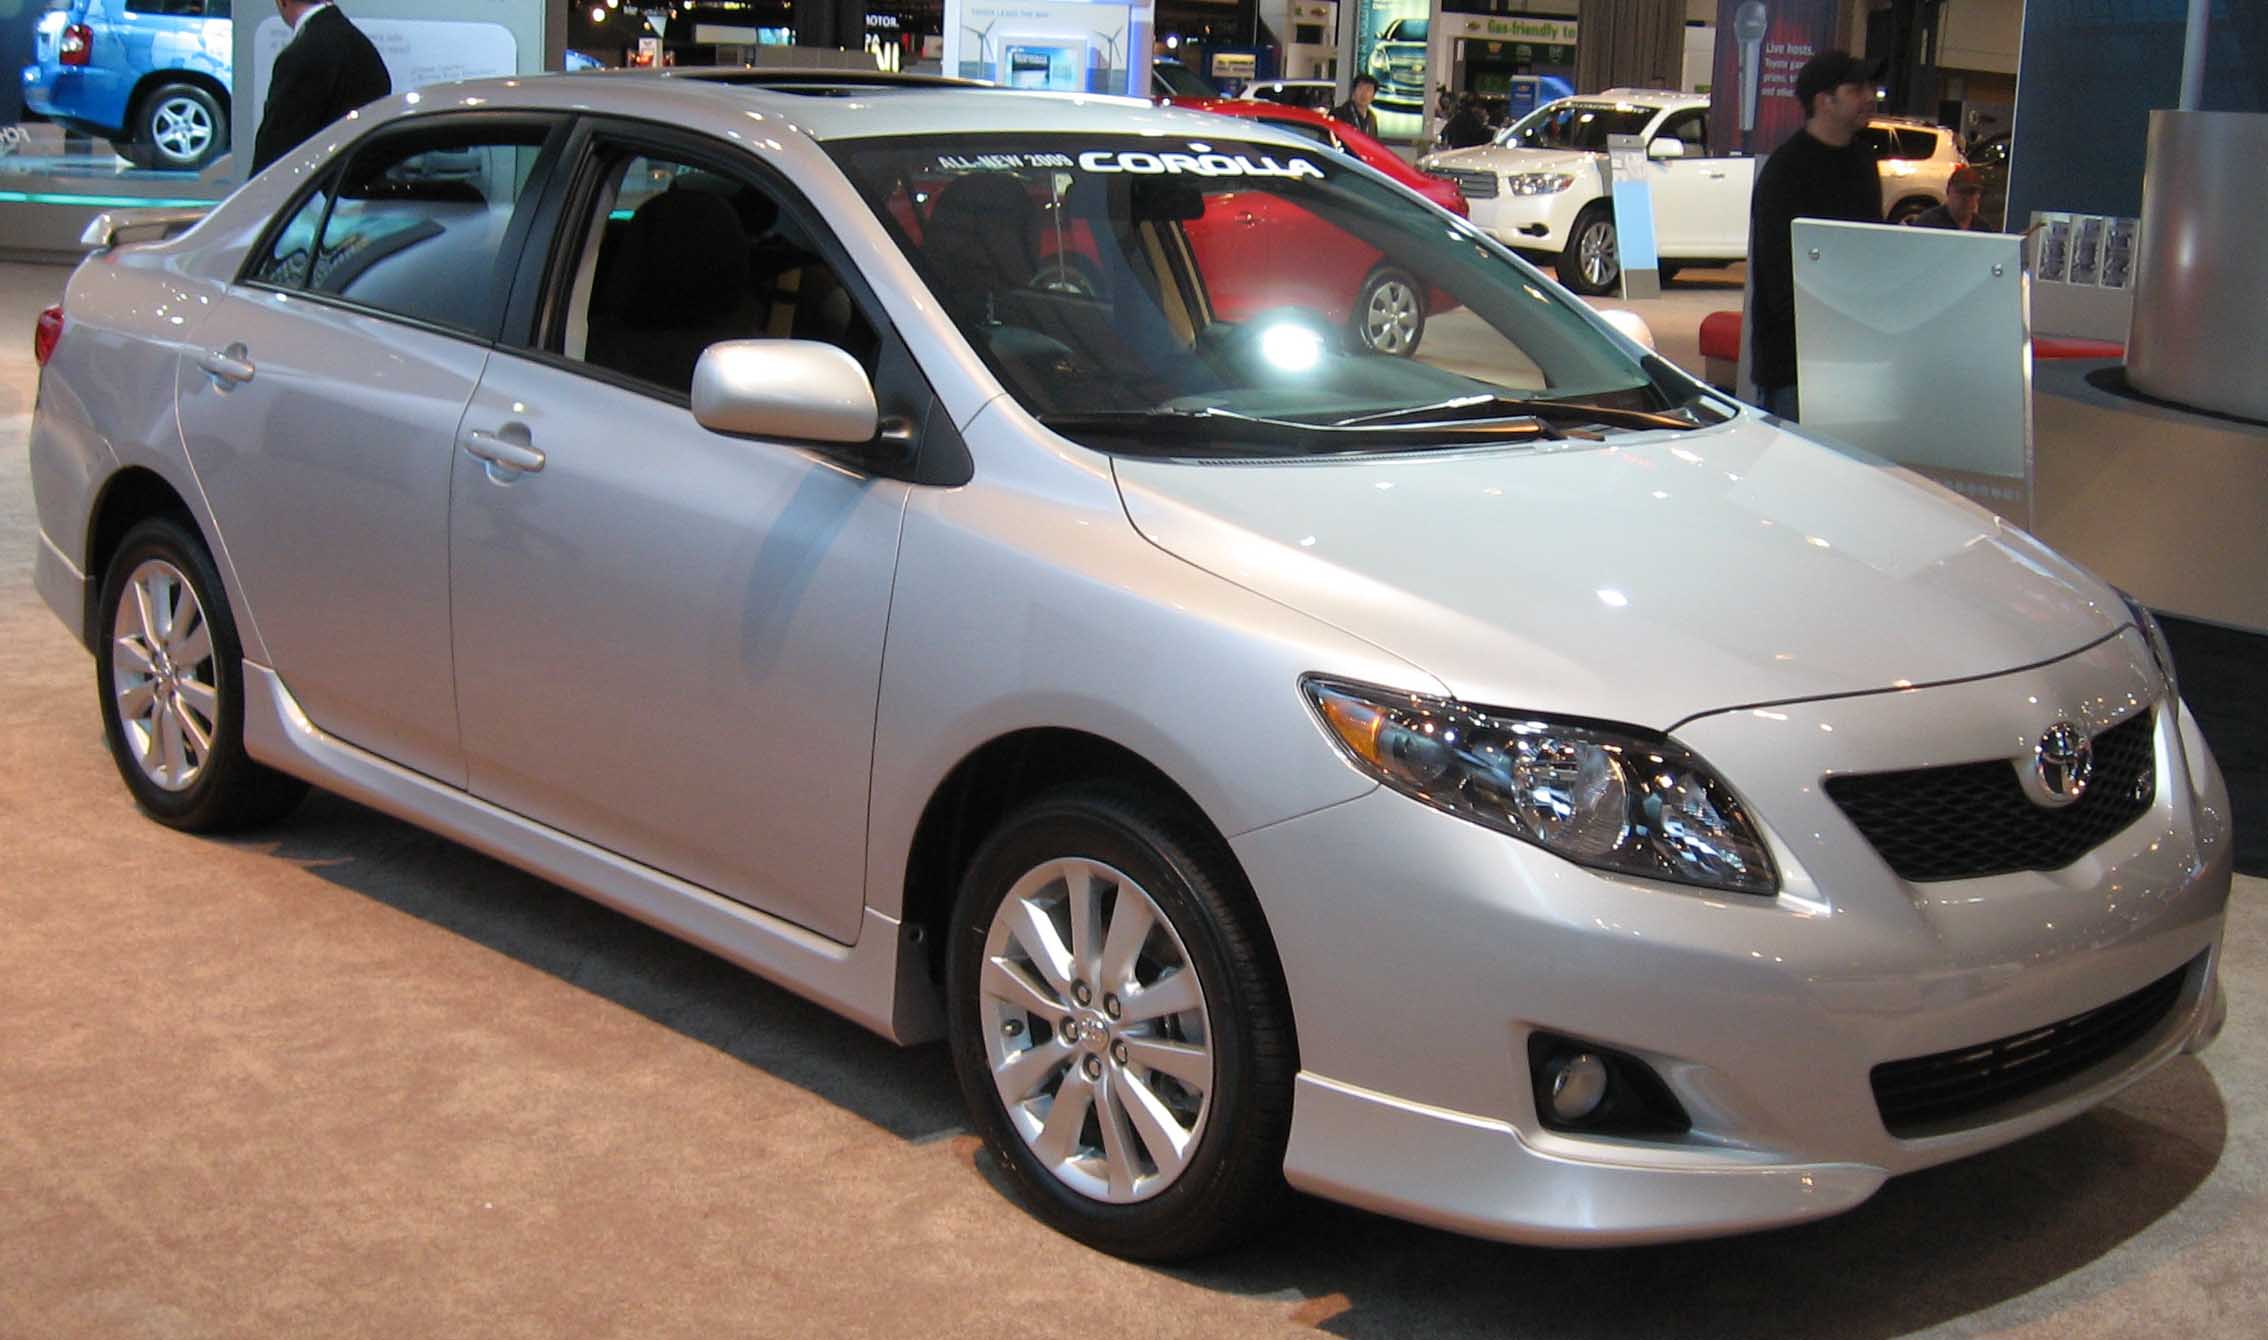 Toyota Corolla 2009 Review, Amazing Pictures and Images